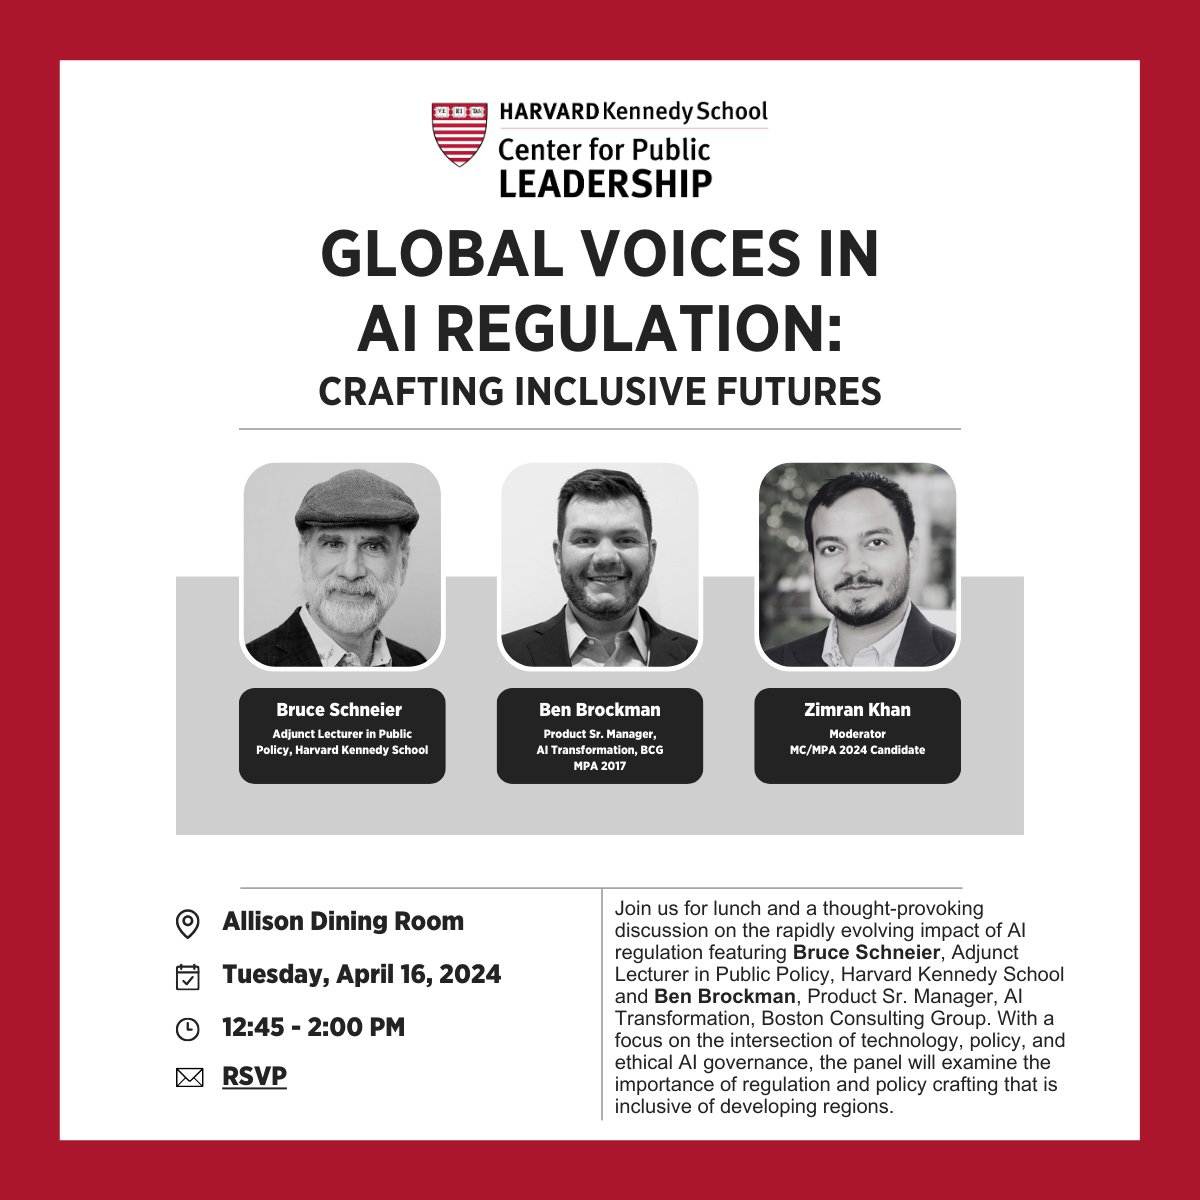 Join us on 4/16 for lunch and a discussion on the evolving impact of AI regulation with Bruce Schneier, Adjunct Lecturer in Public Policy @Kennedy_School and Ben Brockman, Product Sr. Manager, AI Transformation, @BCG. Moderated by Zimran Khan MC/MPA 2024. hksexeced.tfaforms.net/f/event-regist…